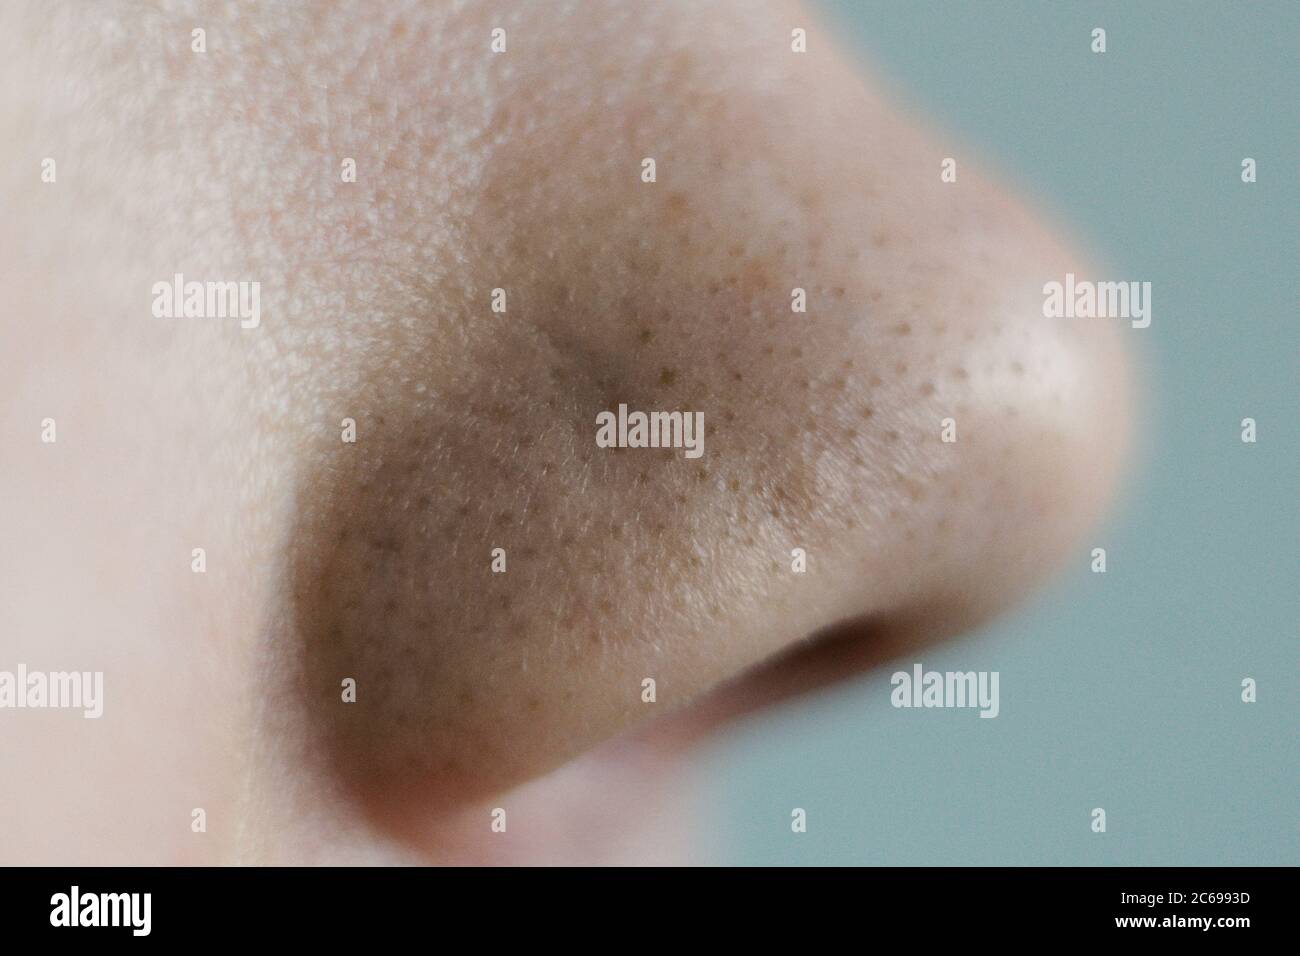 Black dots on the nose. Close up. Nose profile. Stock Photo